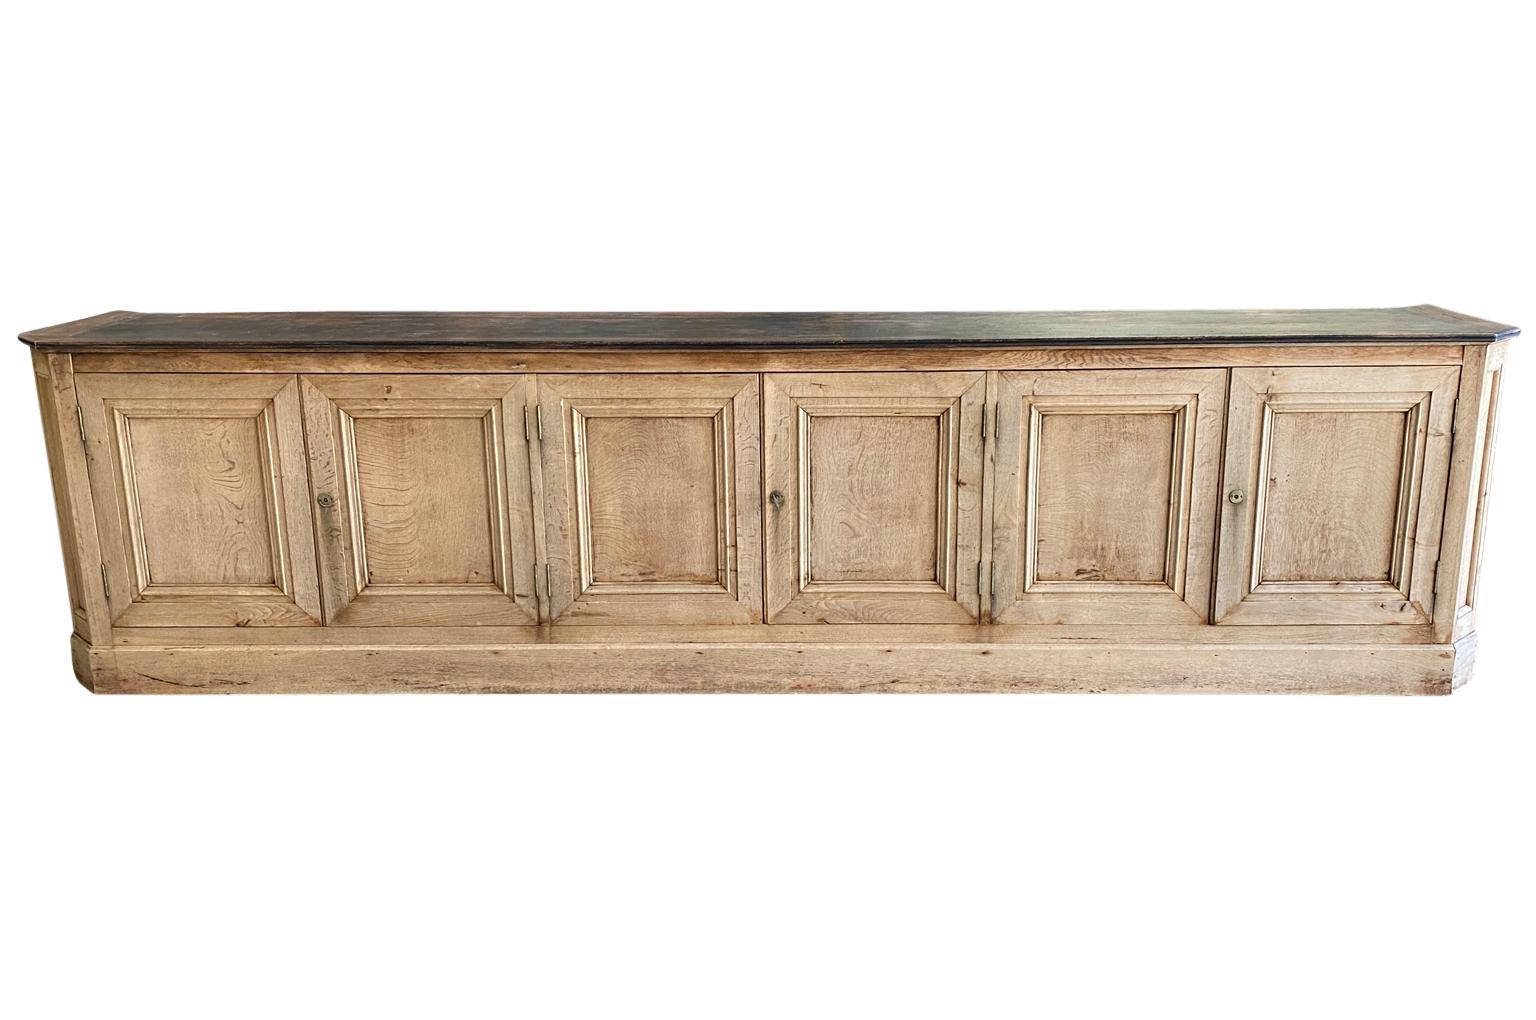 A very handsome later 19th century Buffet - Enfilade from the Provence region of France. Soundly constructed from oak with 6 doors on a plinth base and interior shelving. Nice narrow depth.